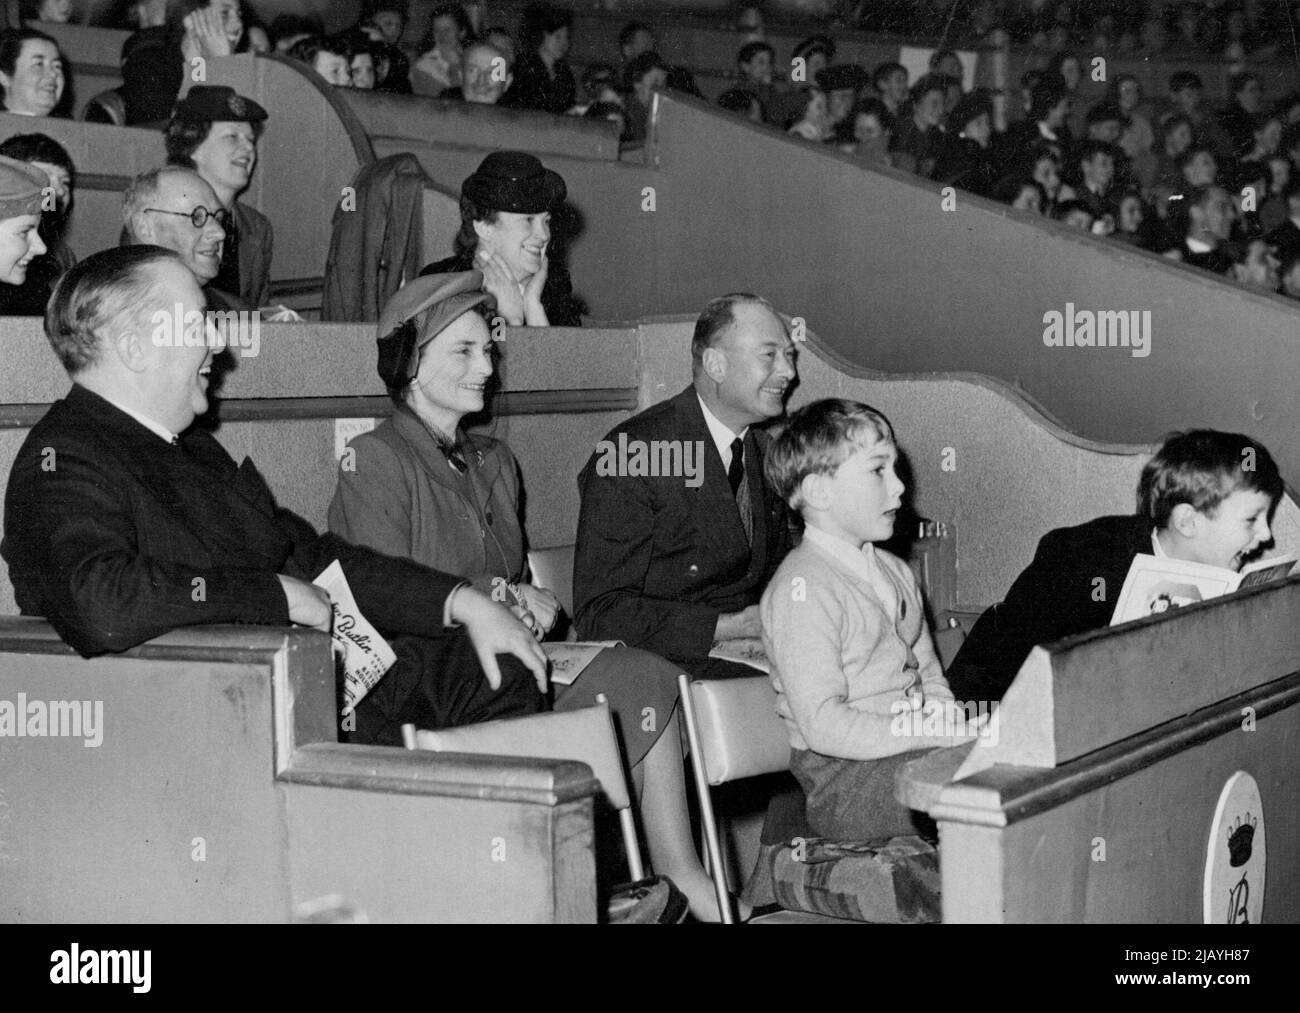 Duke Of Gloucester At Olympia -- The Duke and Duchess of Gloucester with Prince William on left, and Col. Howard Kerr, Aide de camp to the Duke, watching the performance, also seen on right is Col. Howard Kerr's son. H.R.H. The Duke of Gloucester, accompanied by the Duchess and their son Prince William visited Olympia today (Wednesday) to see Bertam Mills Cirous. January 14, 1948. (Photo by London News Agency Photo Ltd.). Stock Photo